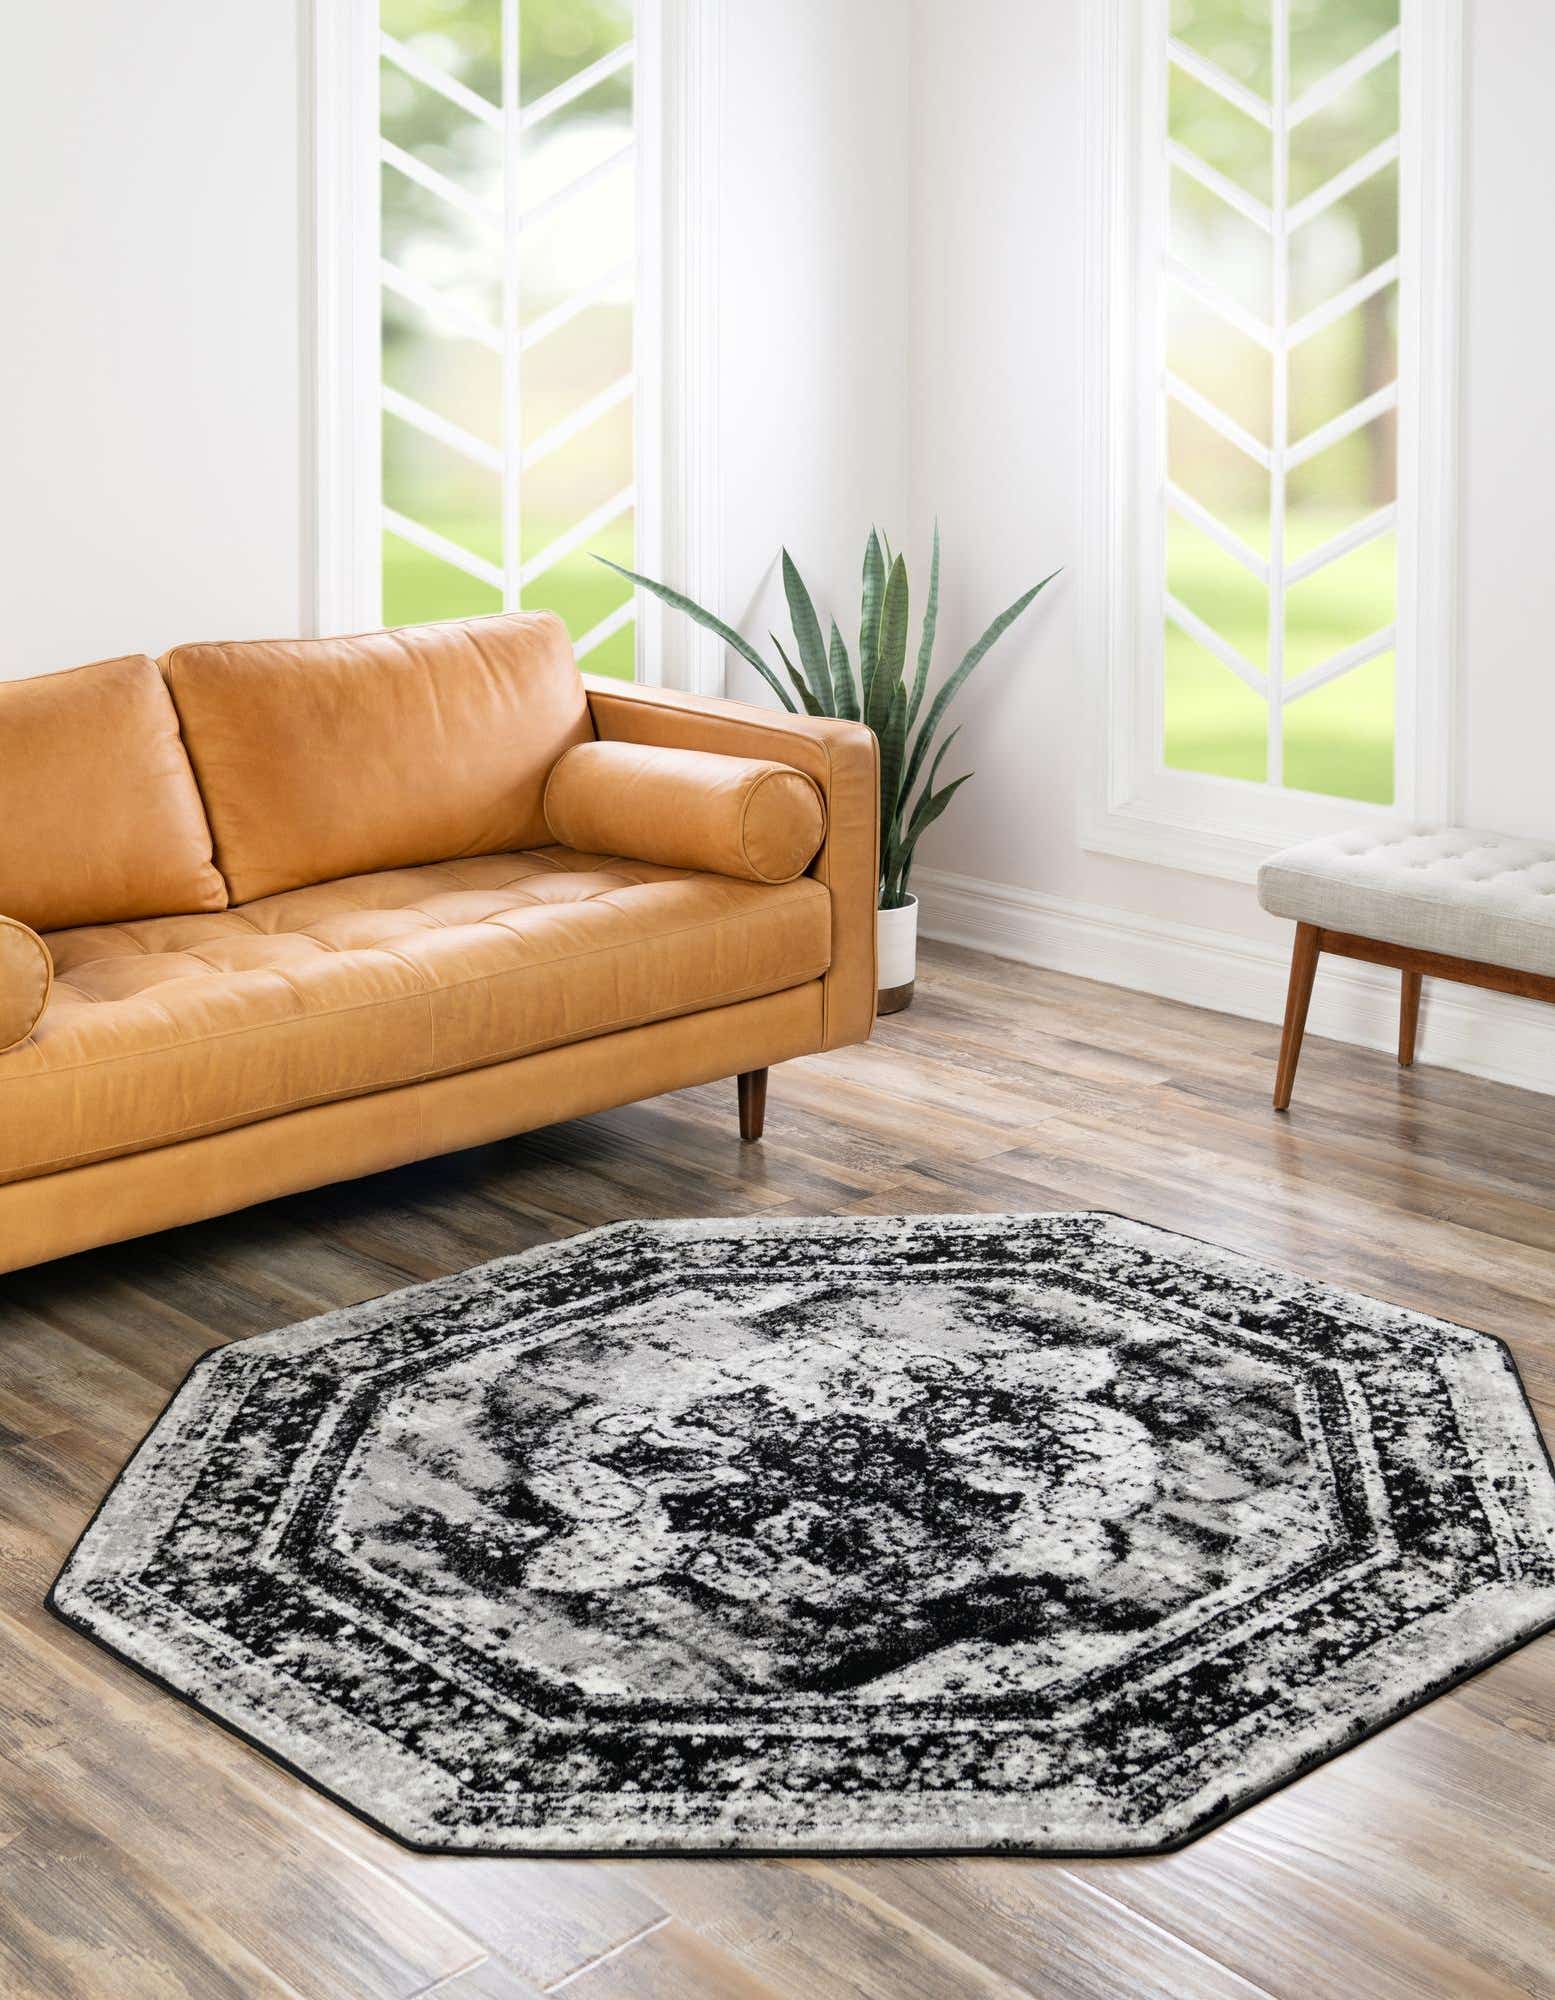 Unique Loom Sofia 5 ft Octagon Beige Abstract, Bohemian Area Rug